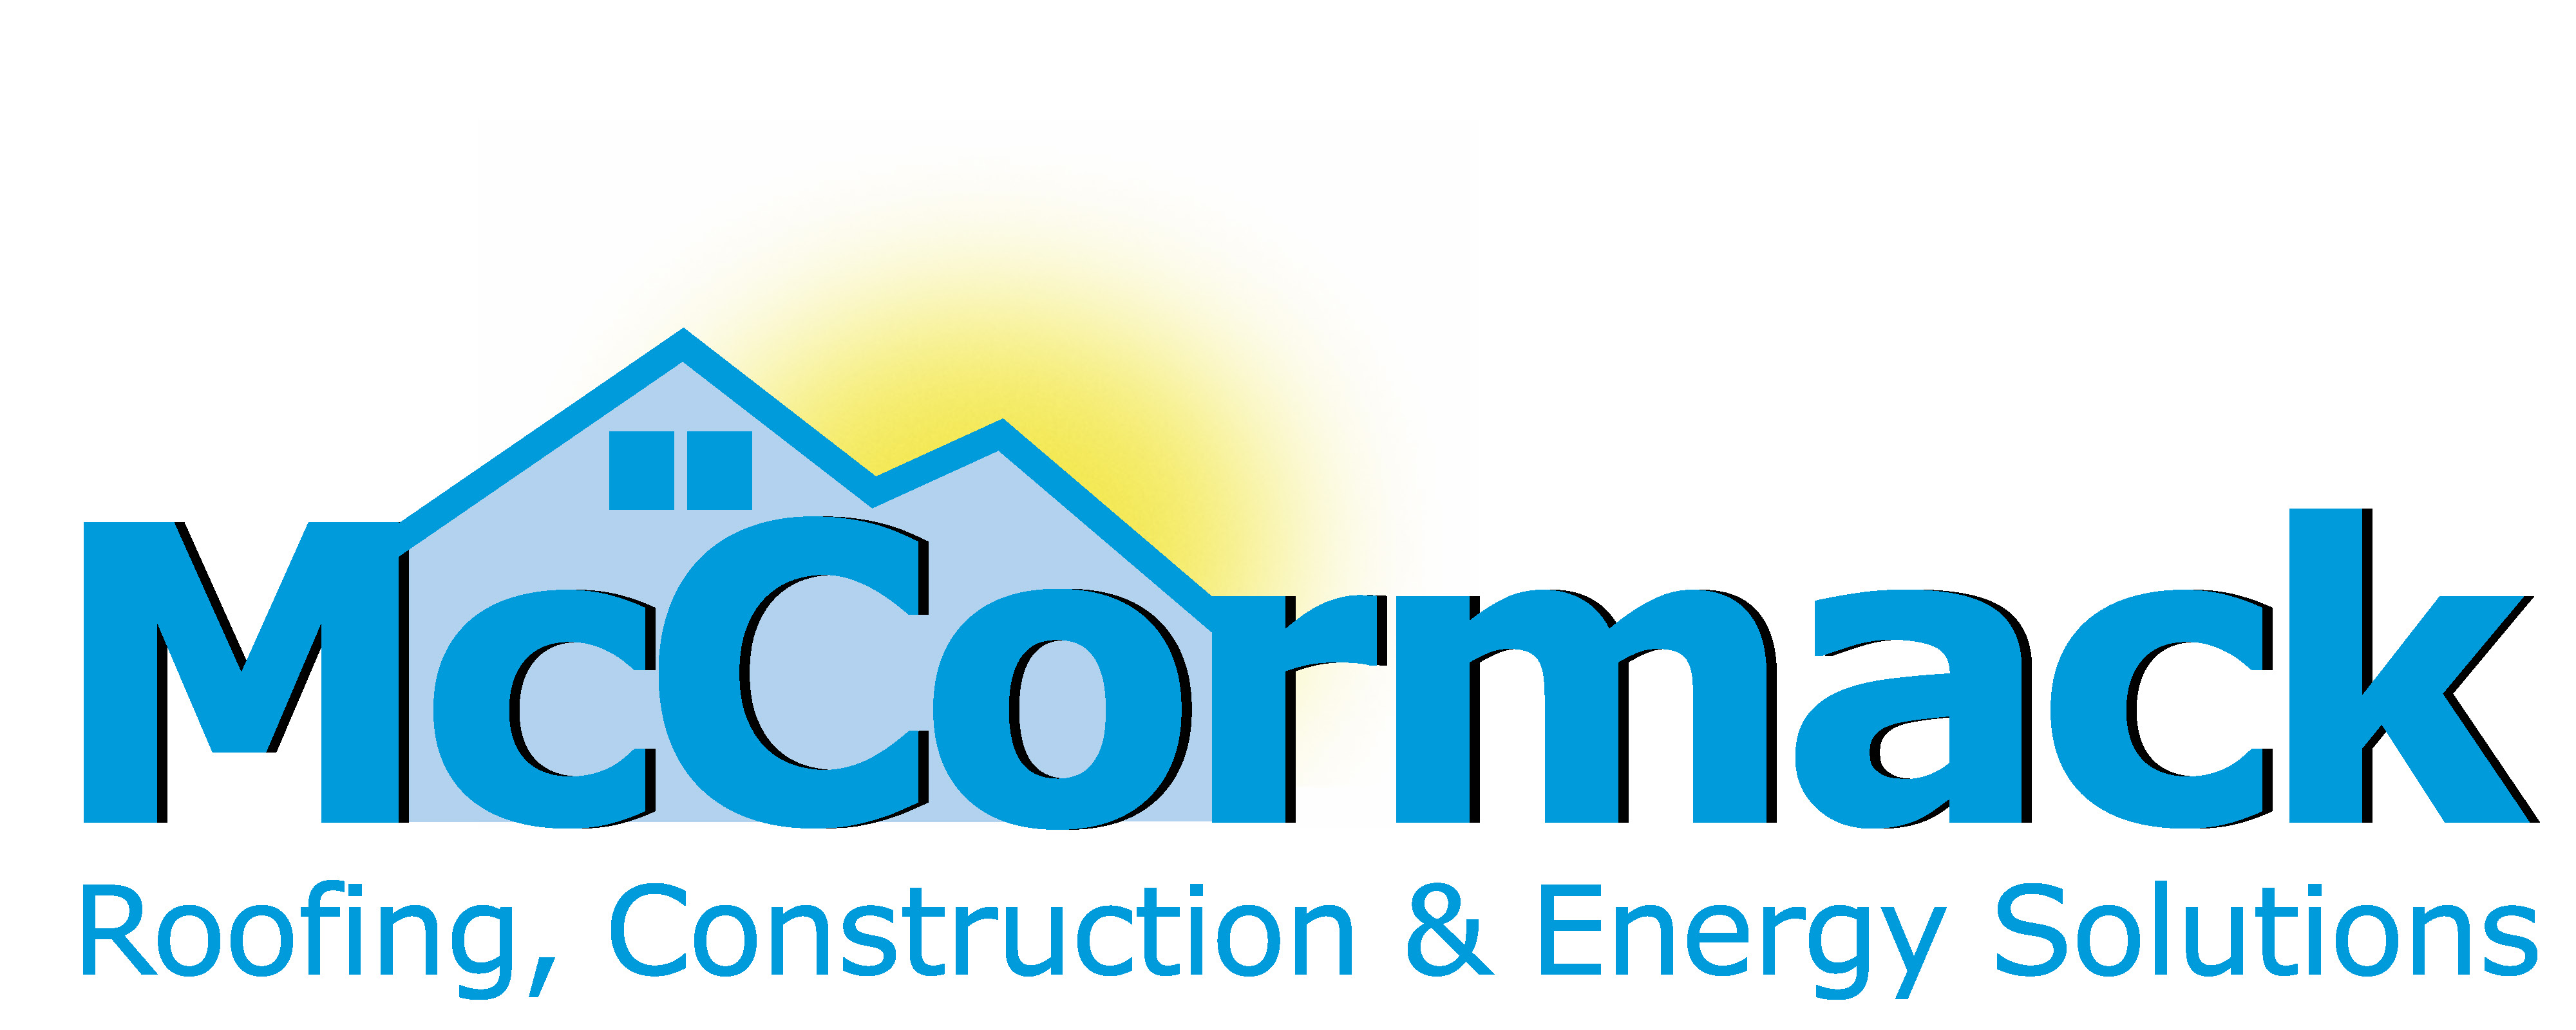 McCormack Roofing